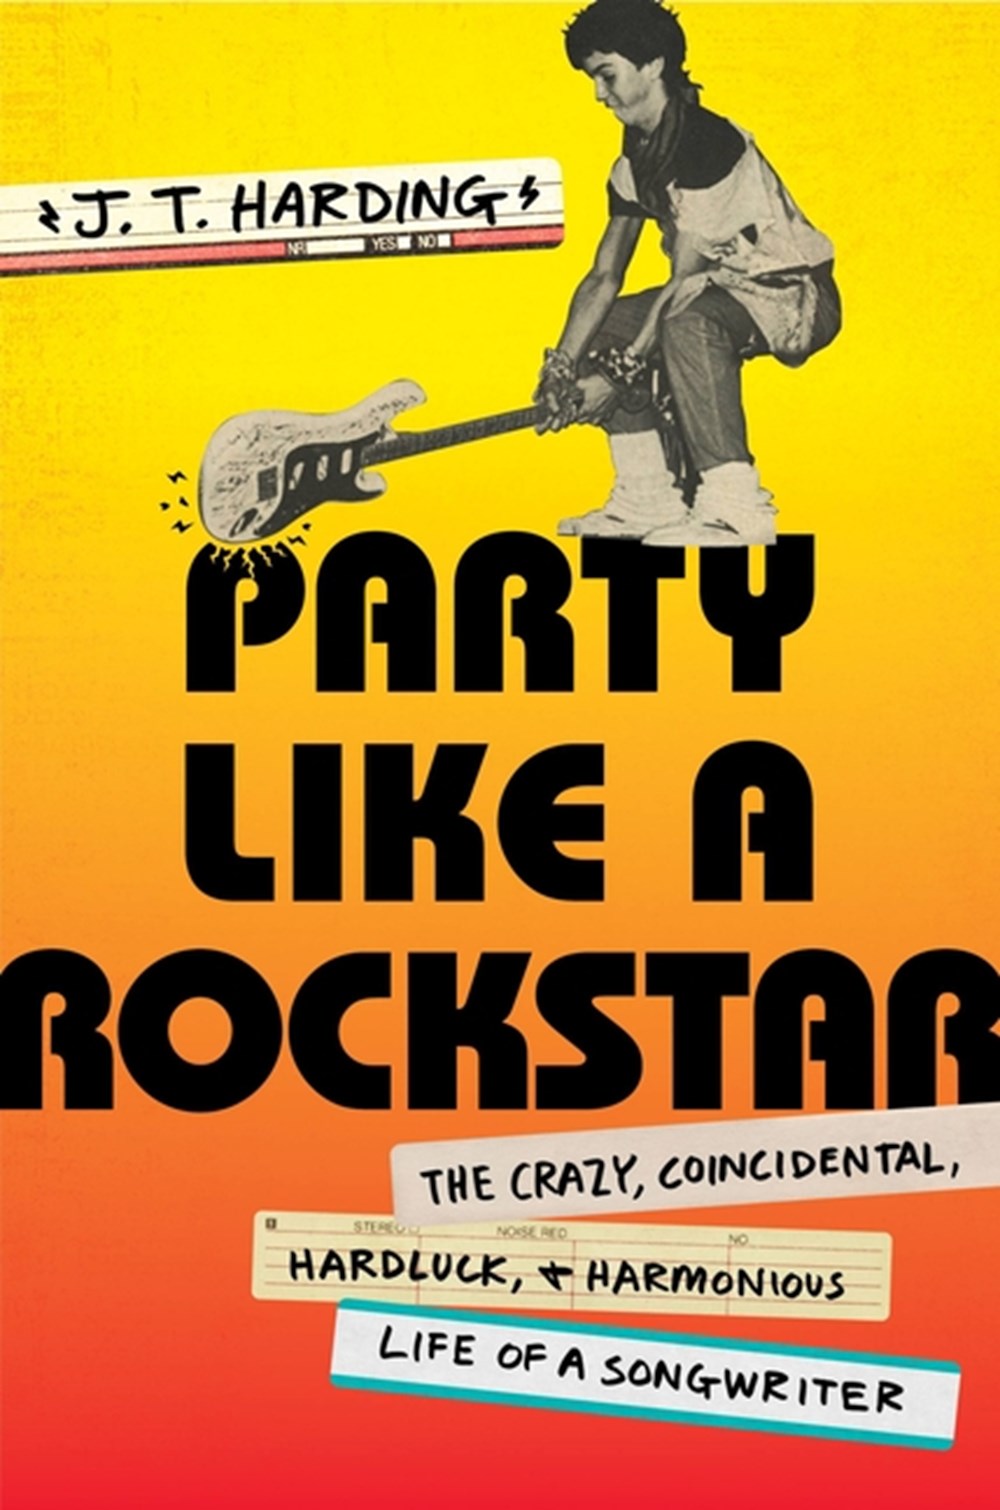 Party Like a Rockstar The Crazy, Coincidental, Hard-Luck, and Harmonious Life of a Songwriter